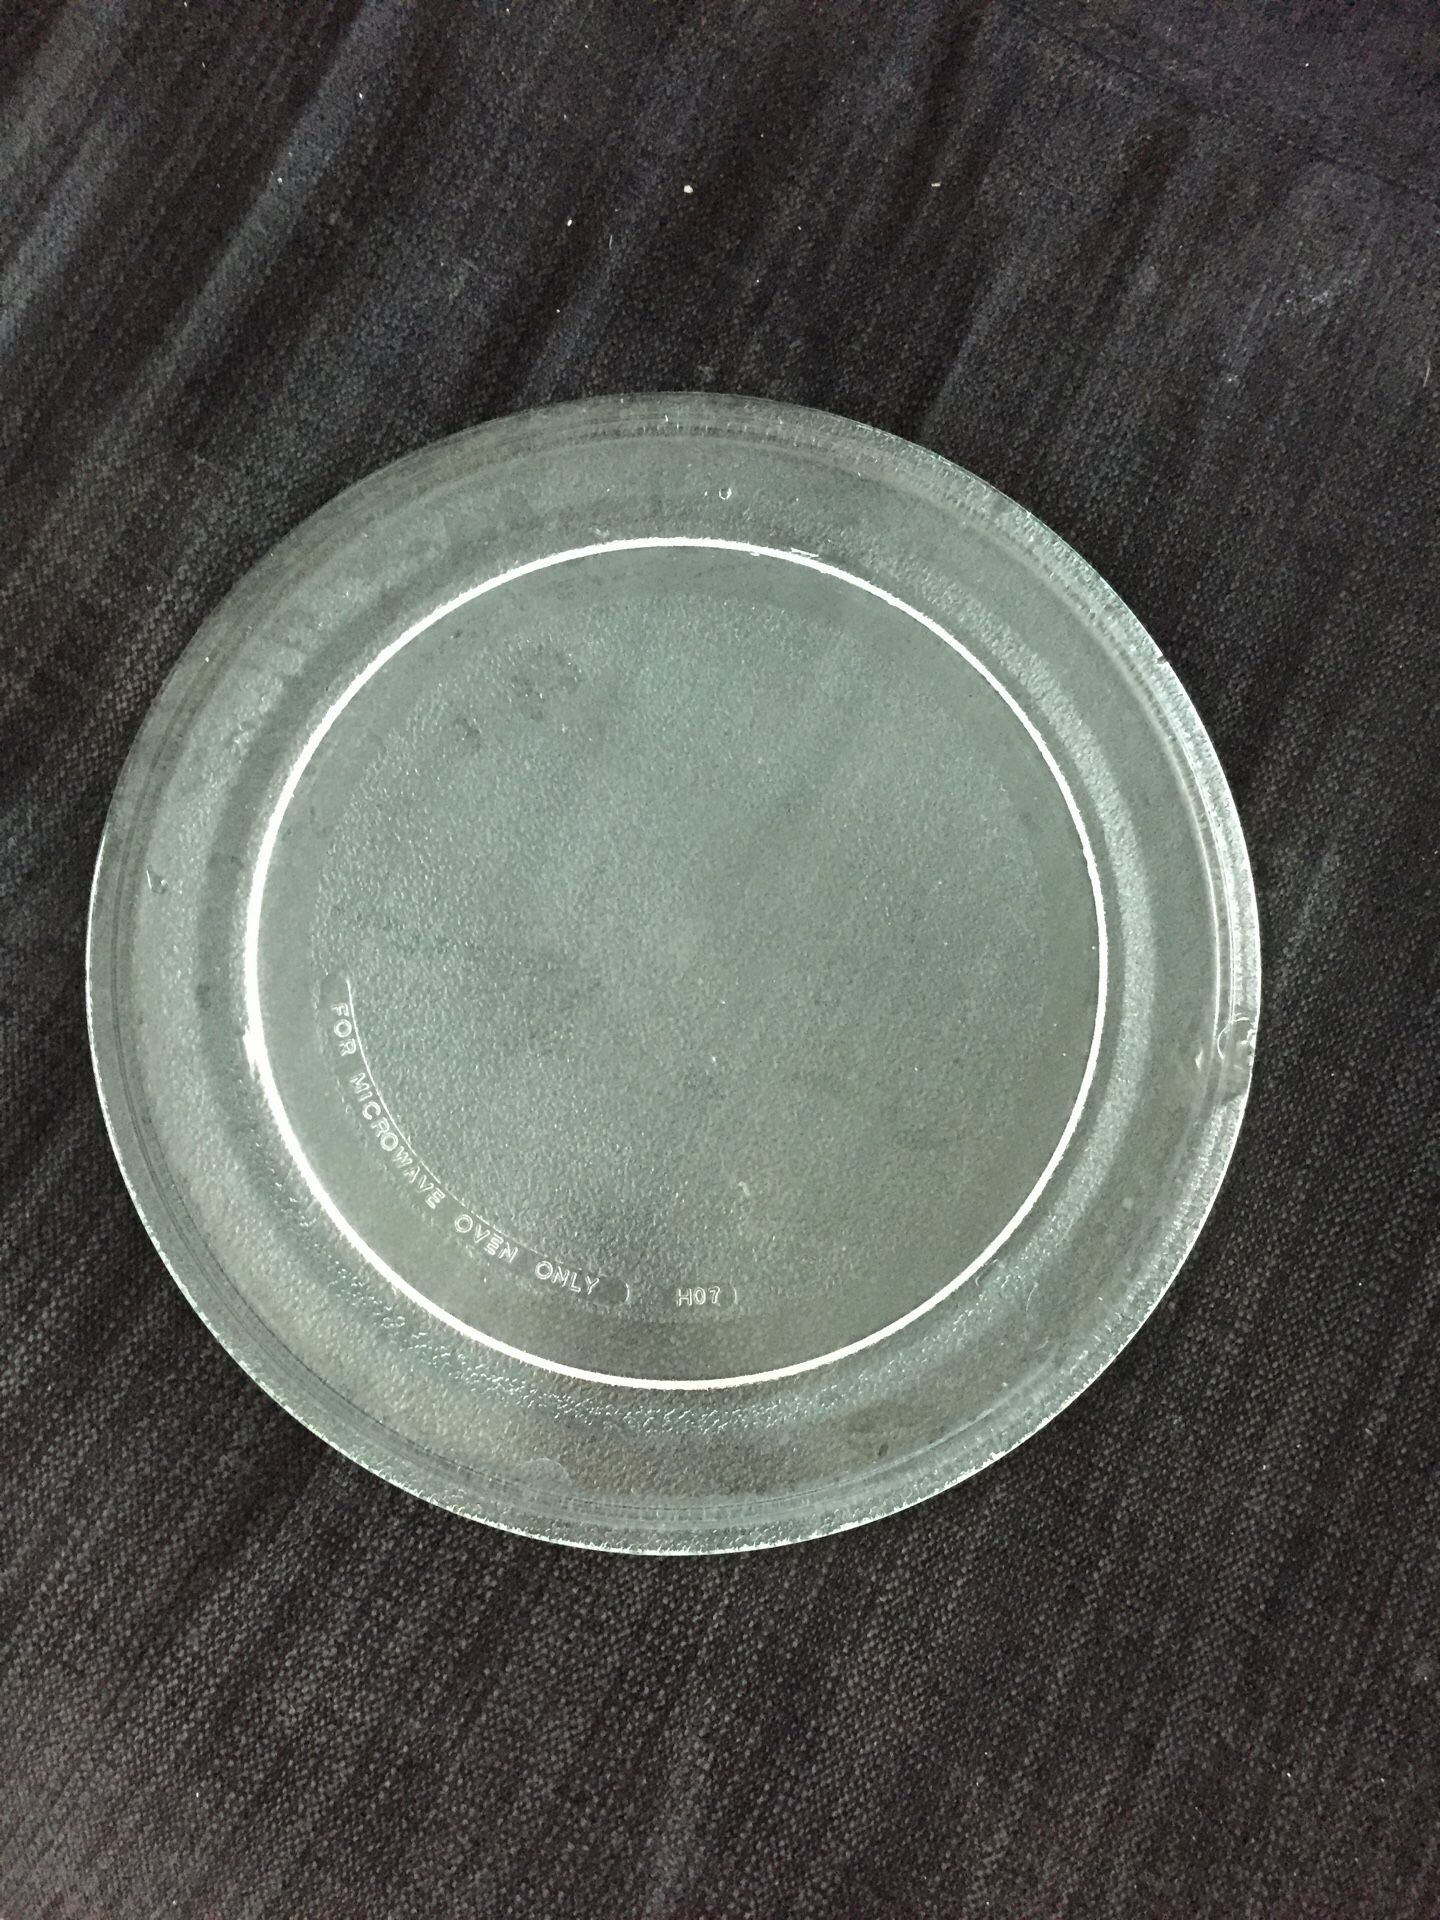 Microwave plate 12 inches